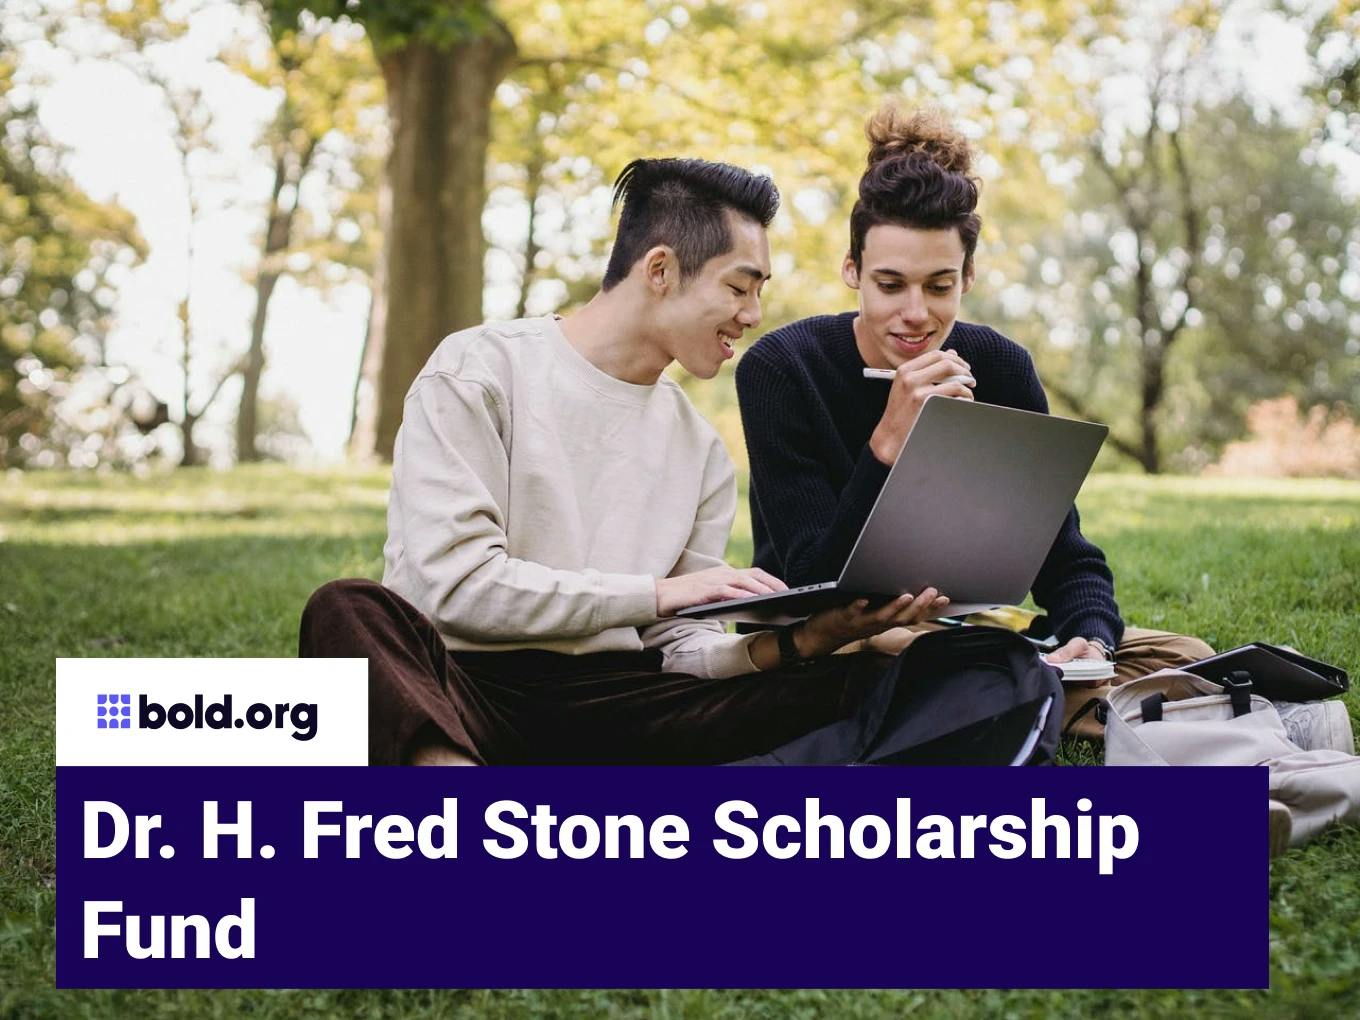 Dr. H. Fred Stone Scholarship Fund